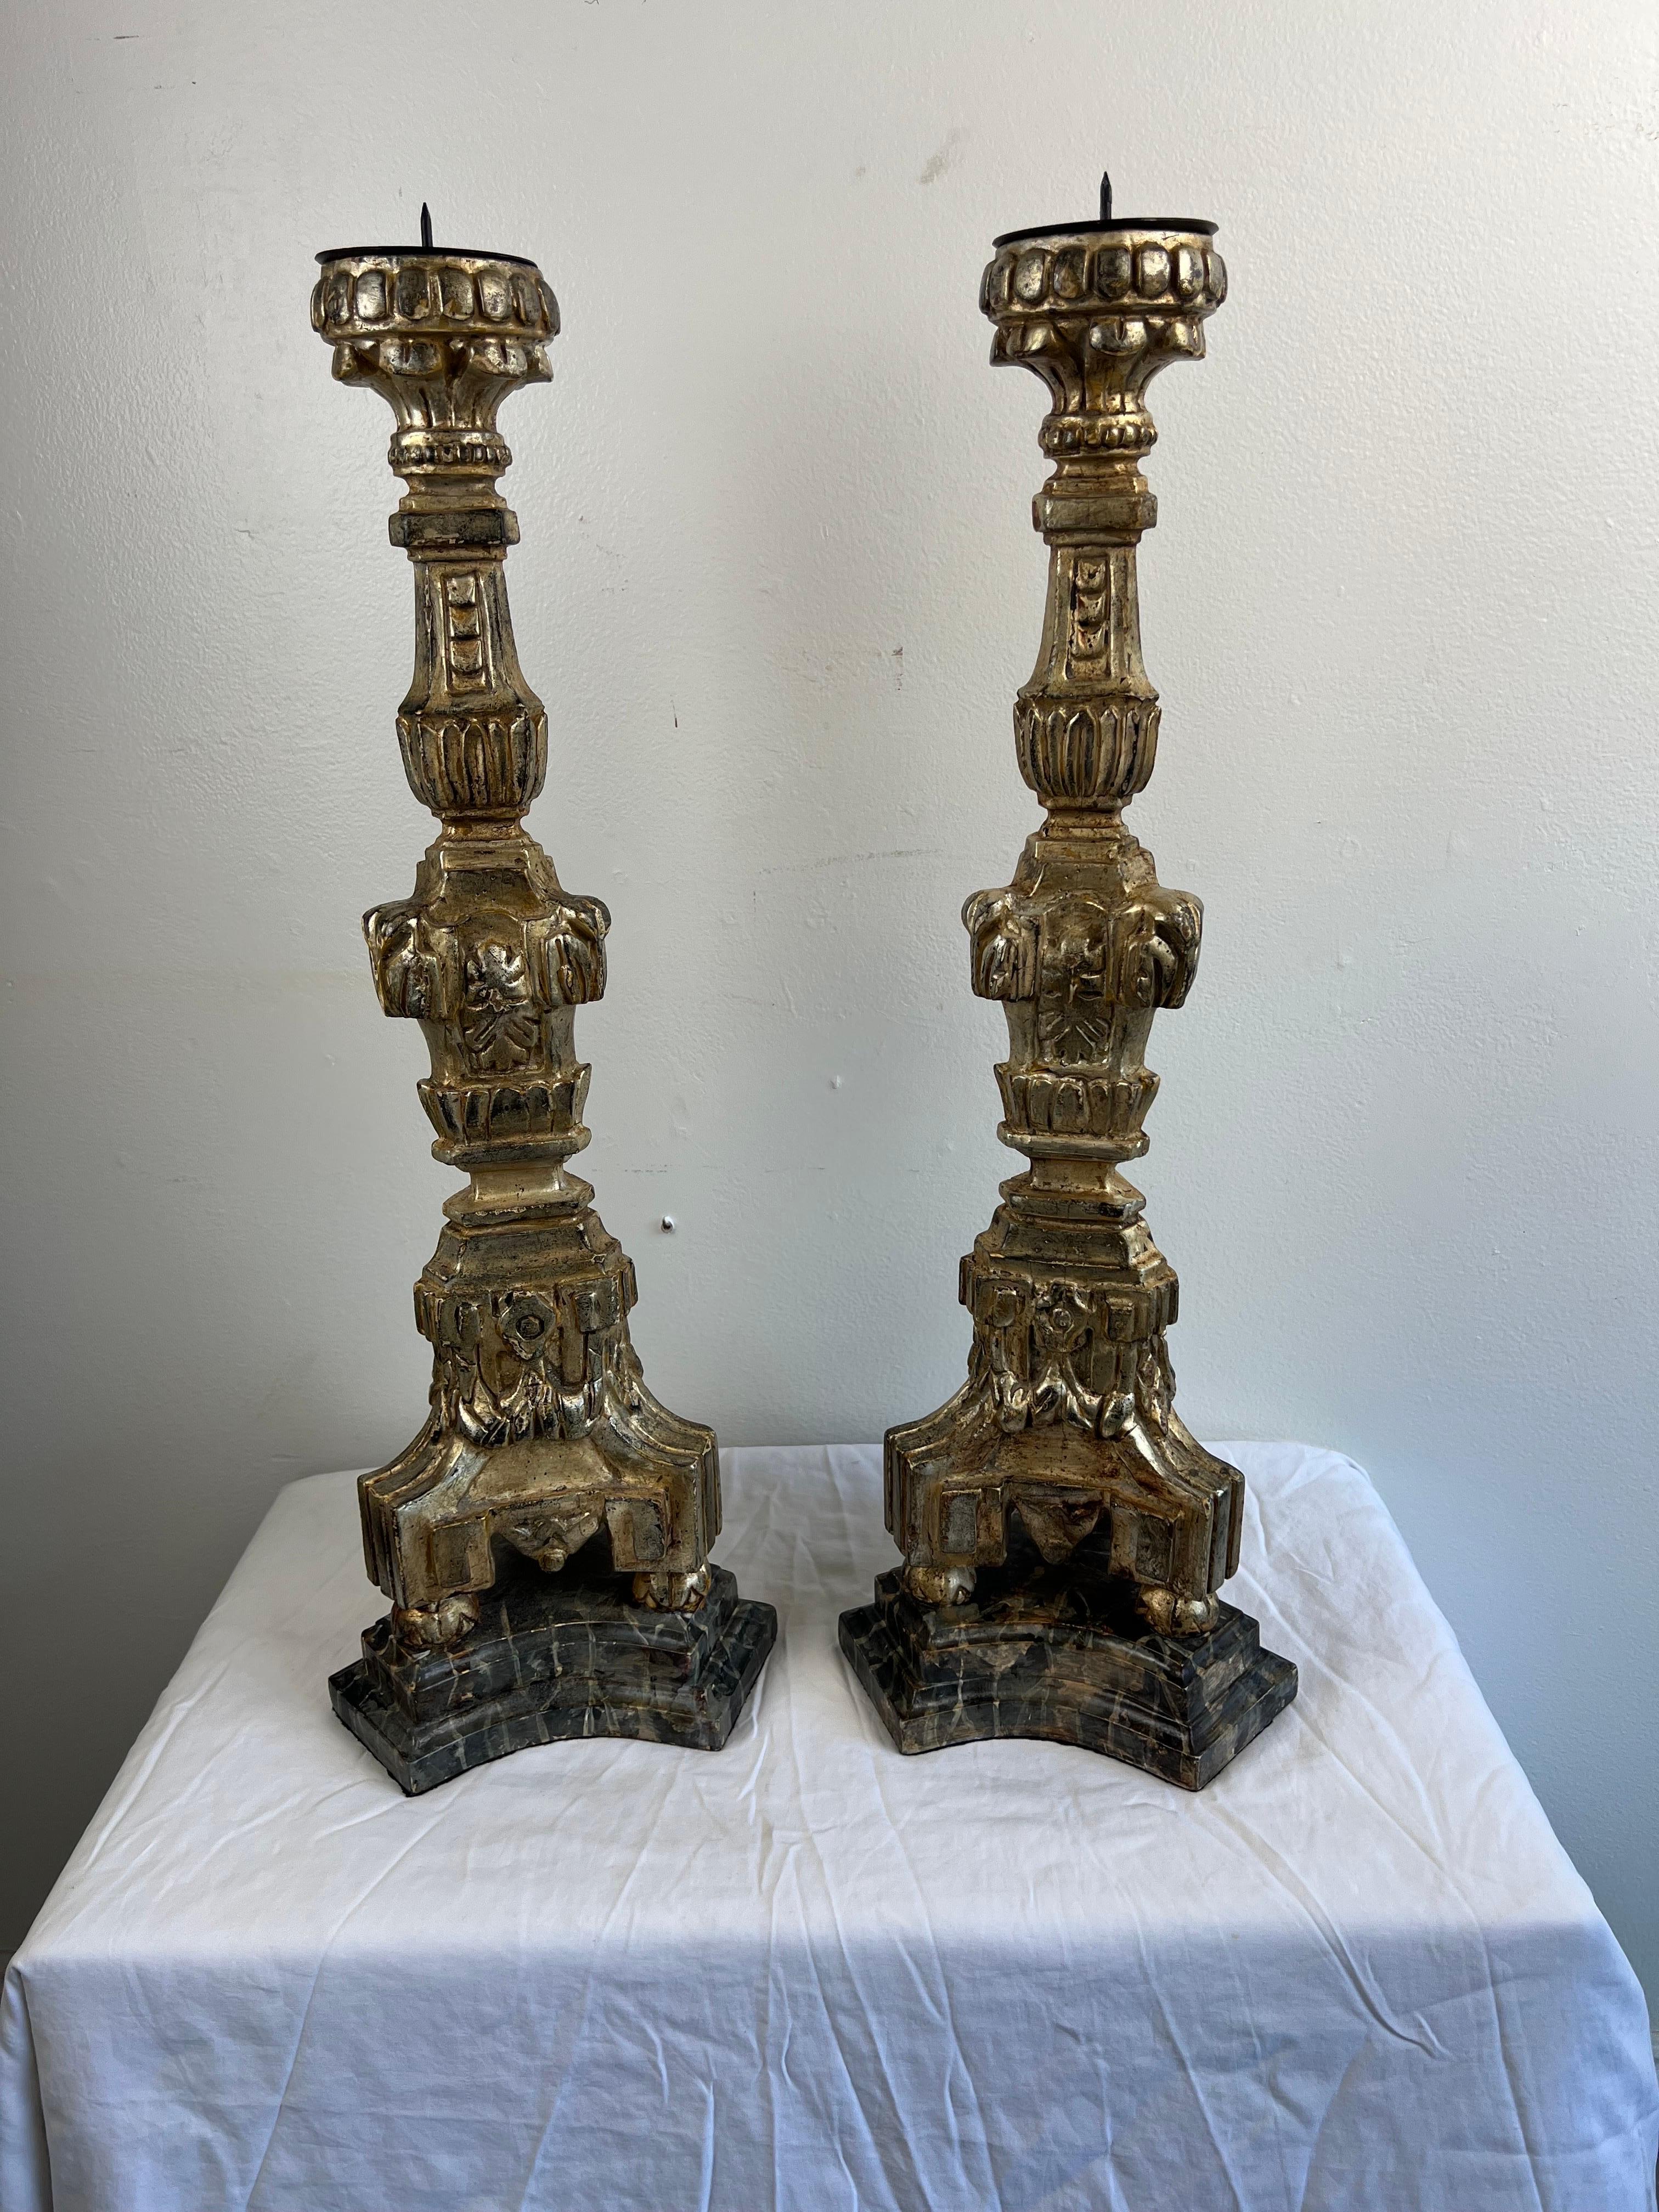 Early 20th Century pair of Italian silver & gold gilt candlesticks.  There is some wear to the gilt finish but overall they beautiful.  The carving depicts flowers, swags, and so much more. Metal bobeches with tiny prickets.The candlesticks stand on